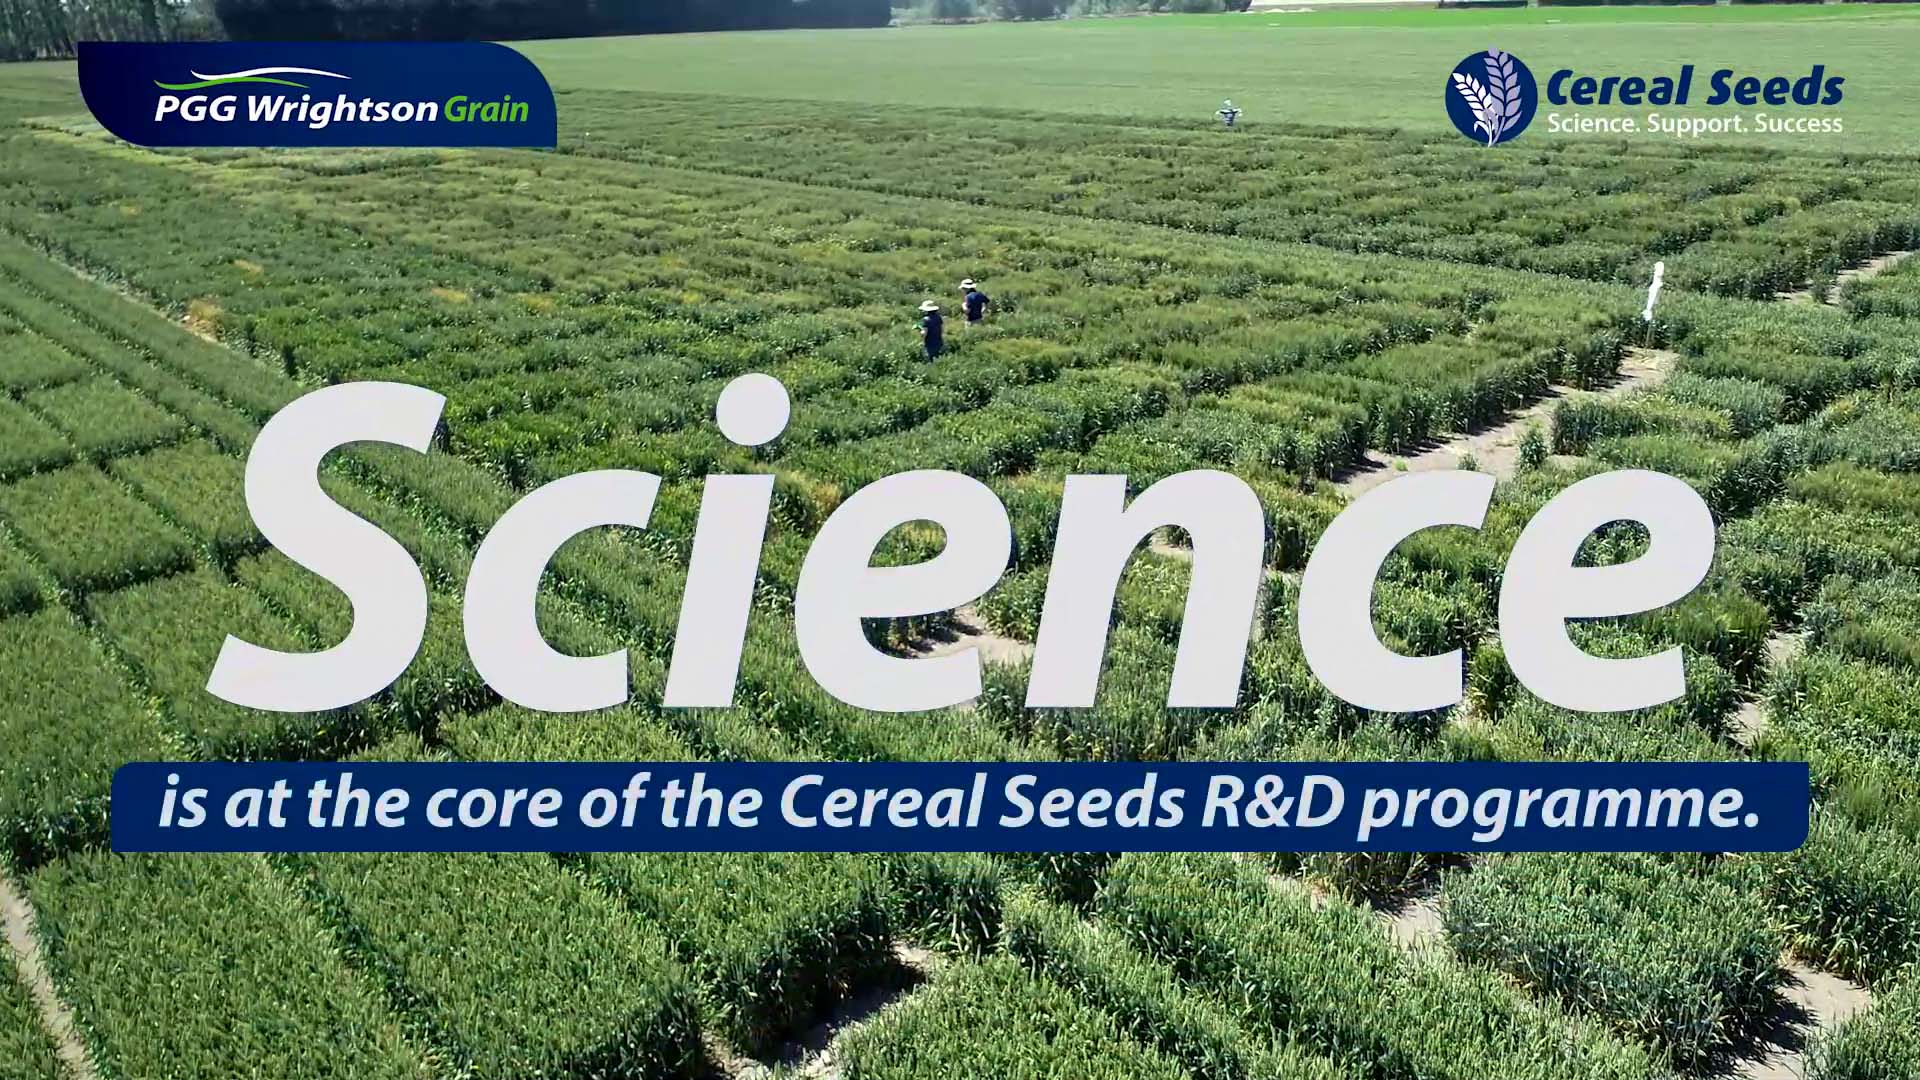 Cereal Seeds R&D Overview Video